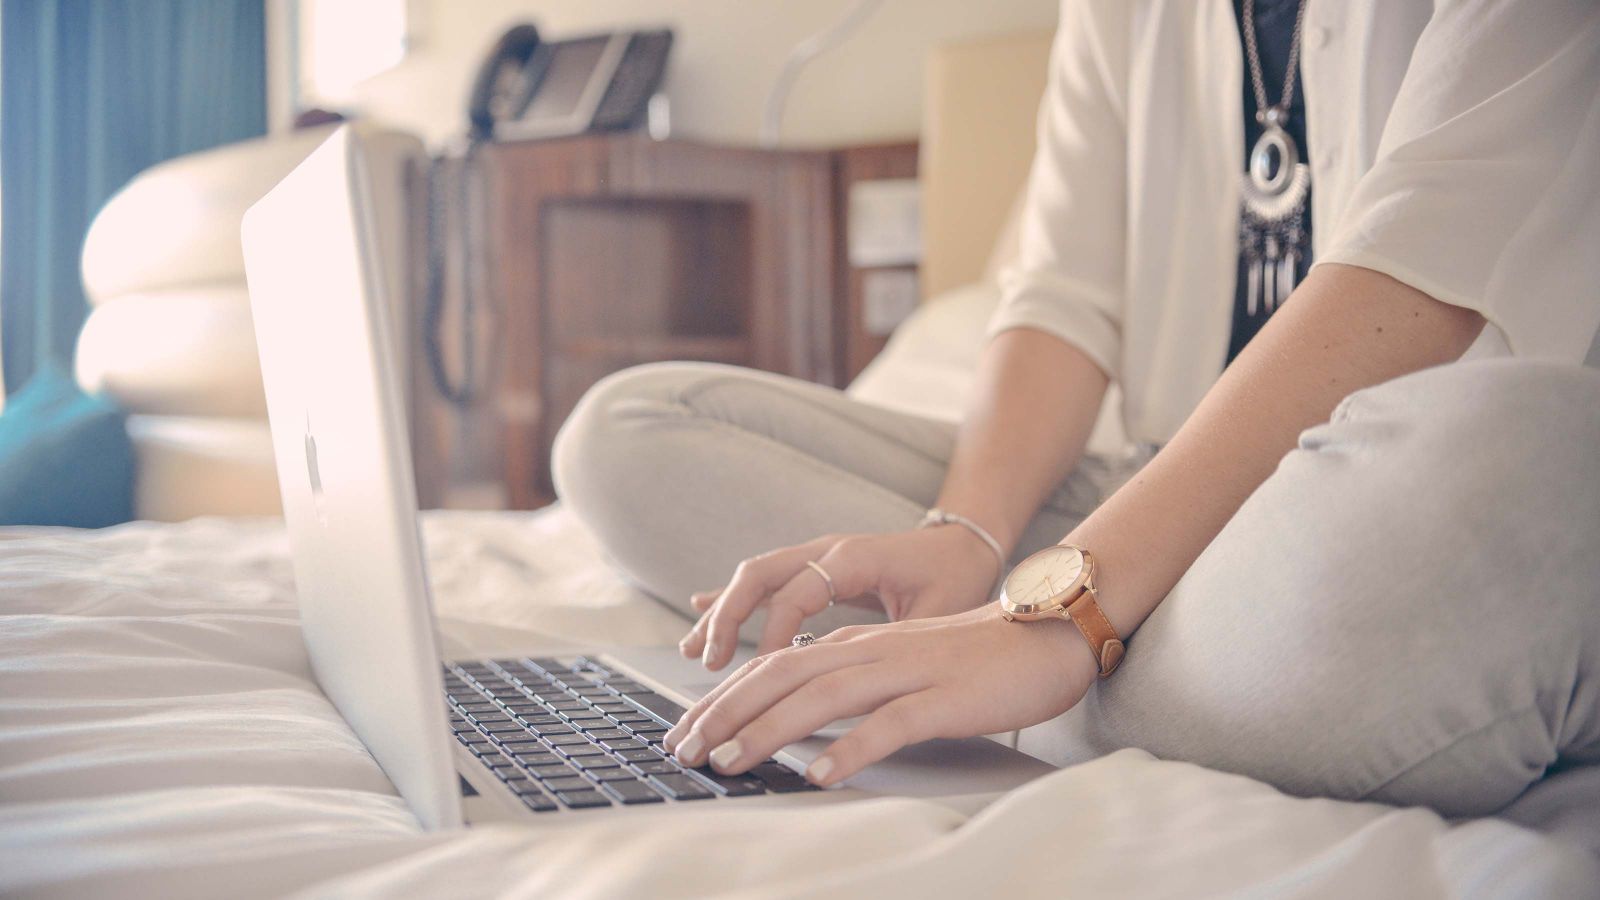 A woman uses an Apple laptop on a bed.